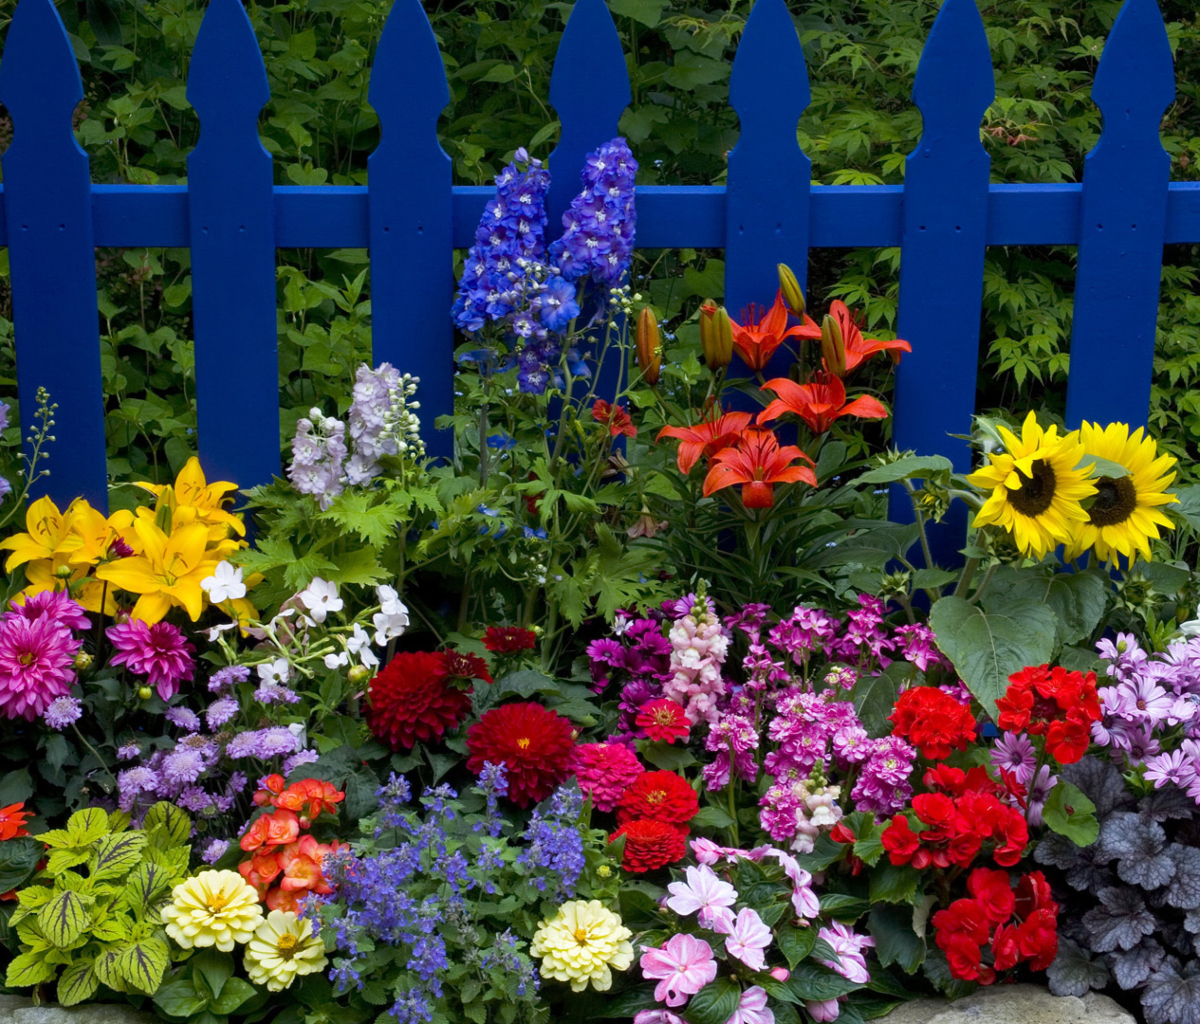 Garden Flowers In Front Of Bright Blue Fence wallpaper 1200x1024